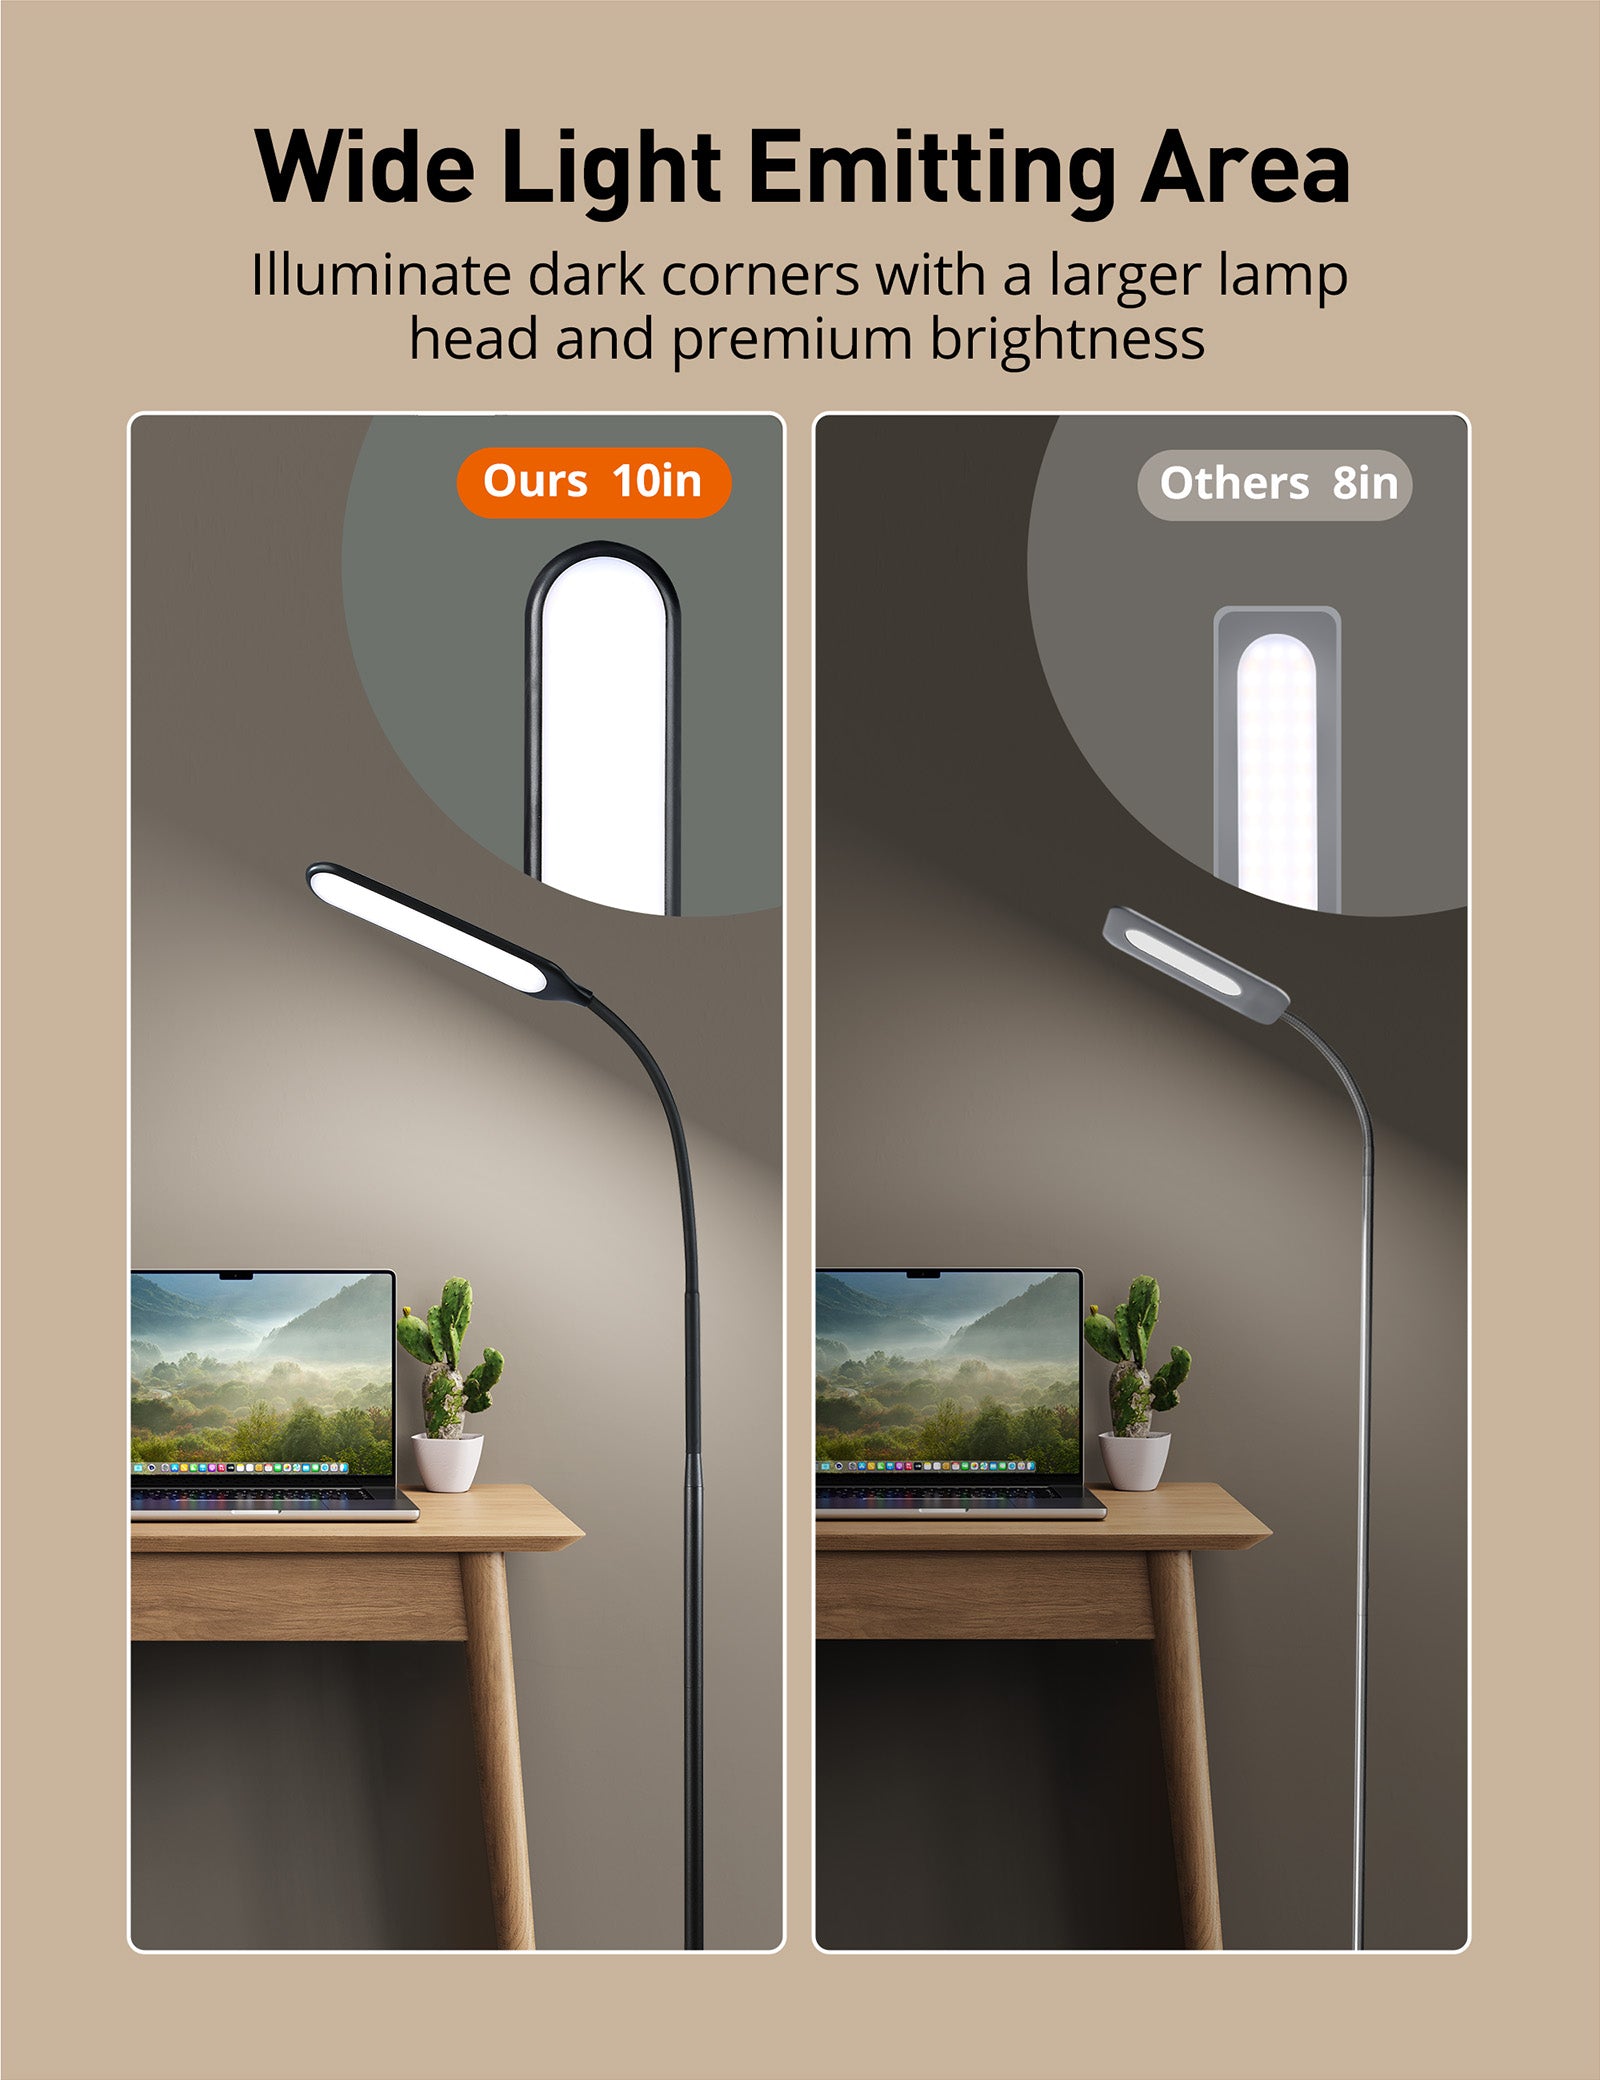 Sympa Floor Lamp DL023, Dimmable Standing Tall Pole Light Touch Control